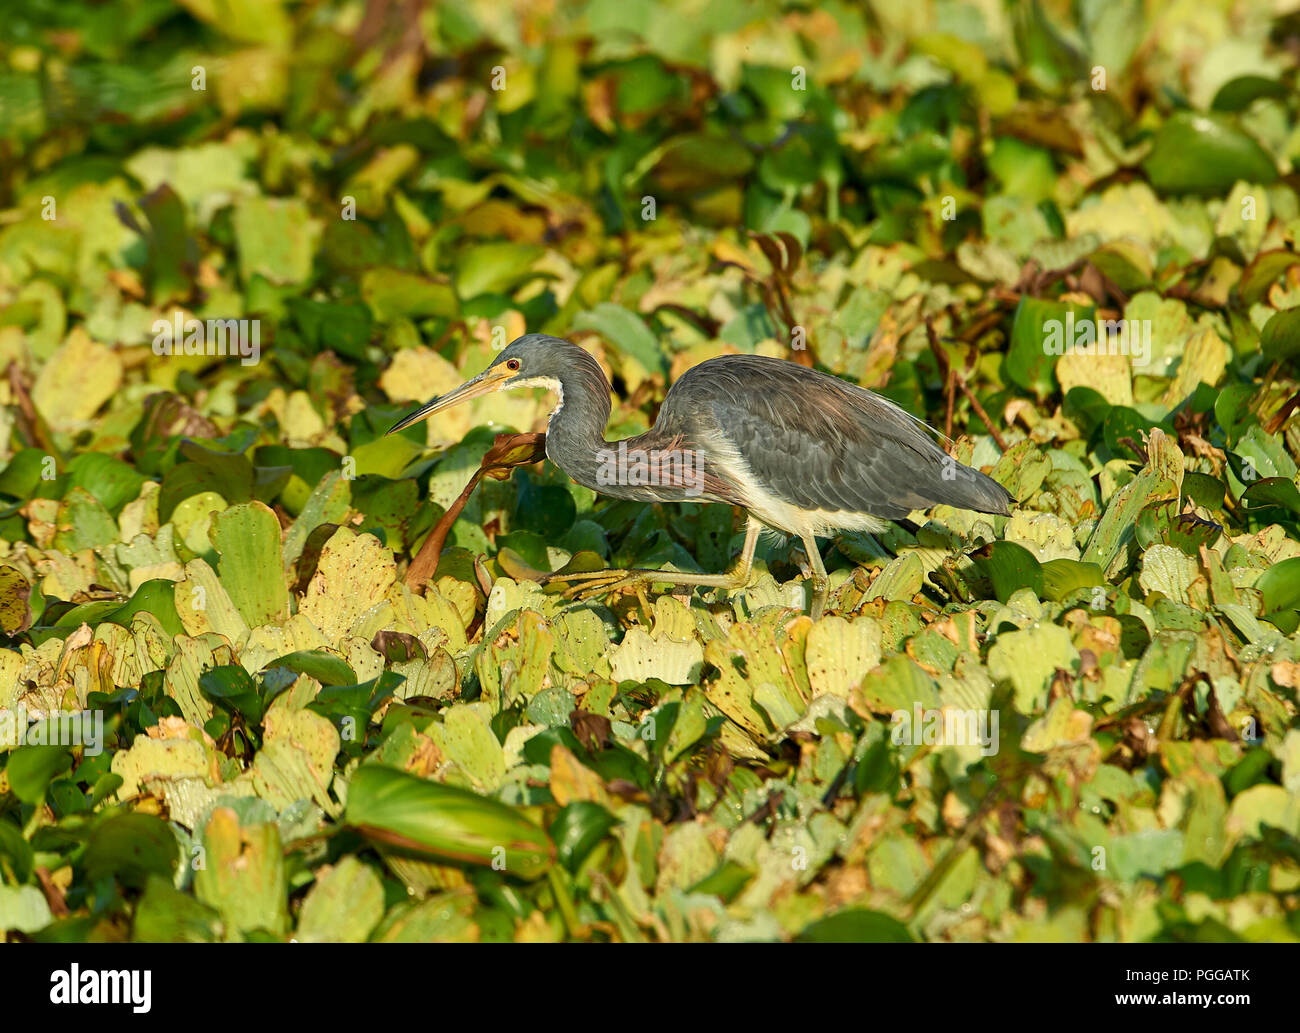 Tricolored Heron (Egretta tricolor) searching for food among water hyacinths on Lake Chapala, Jocotopec, Jalisco, Mexico Stock Photo